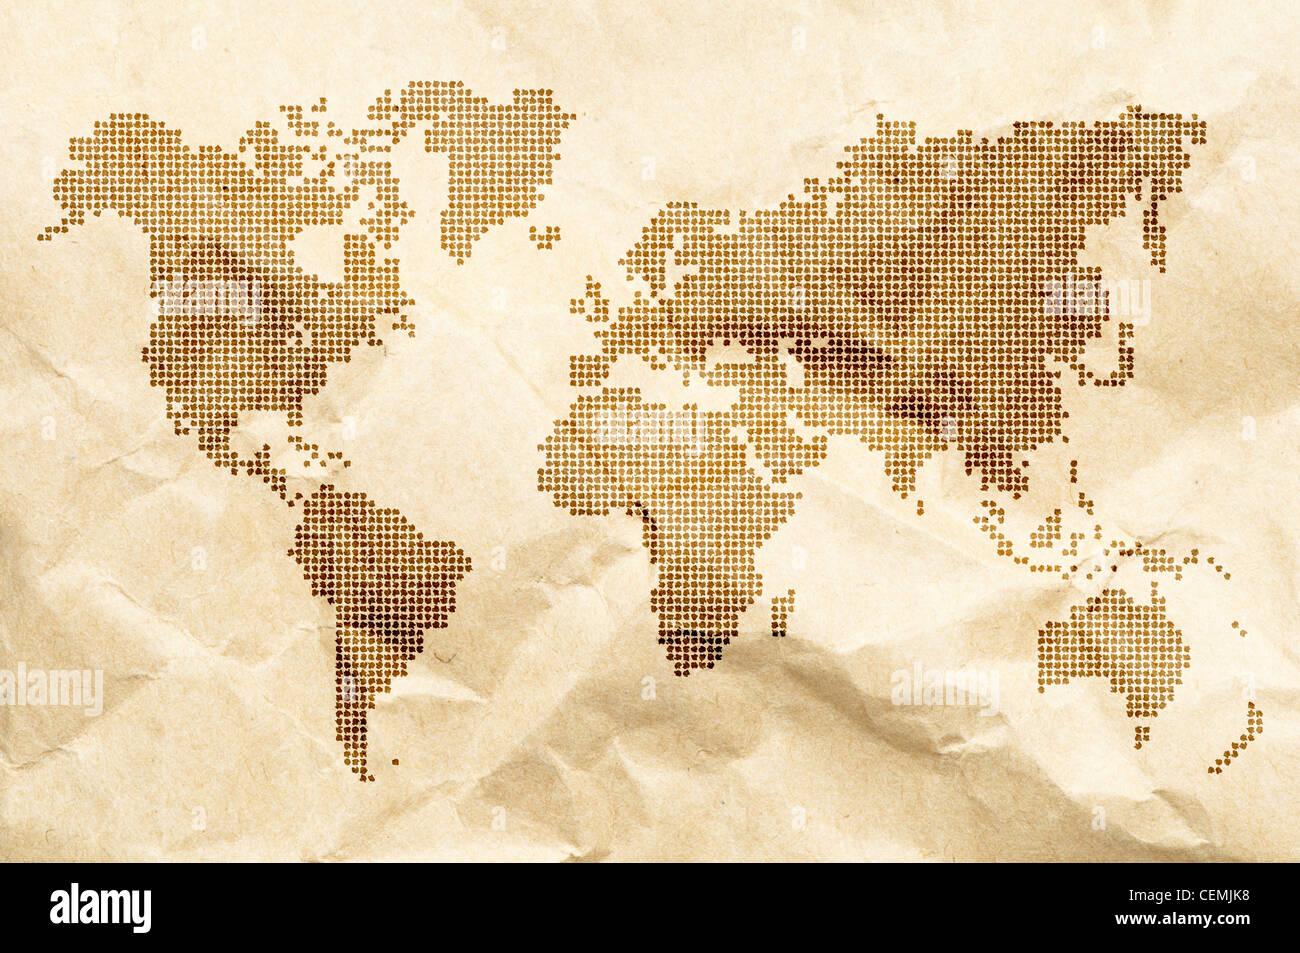 Dot World old style map background. Crumpled old paper Stock Photo